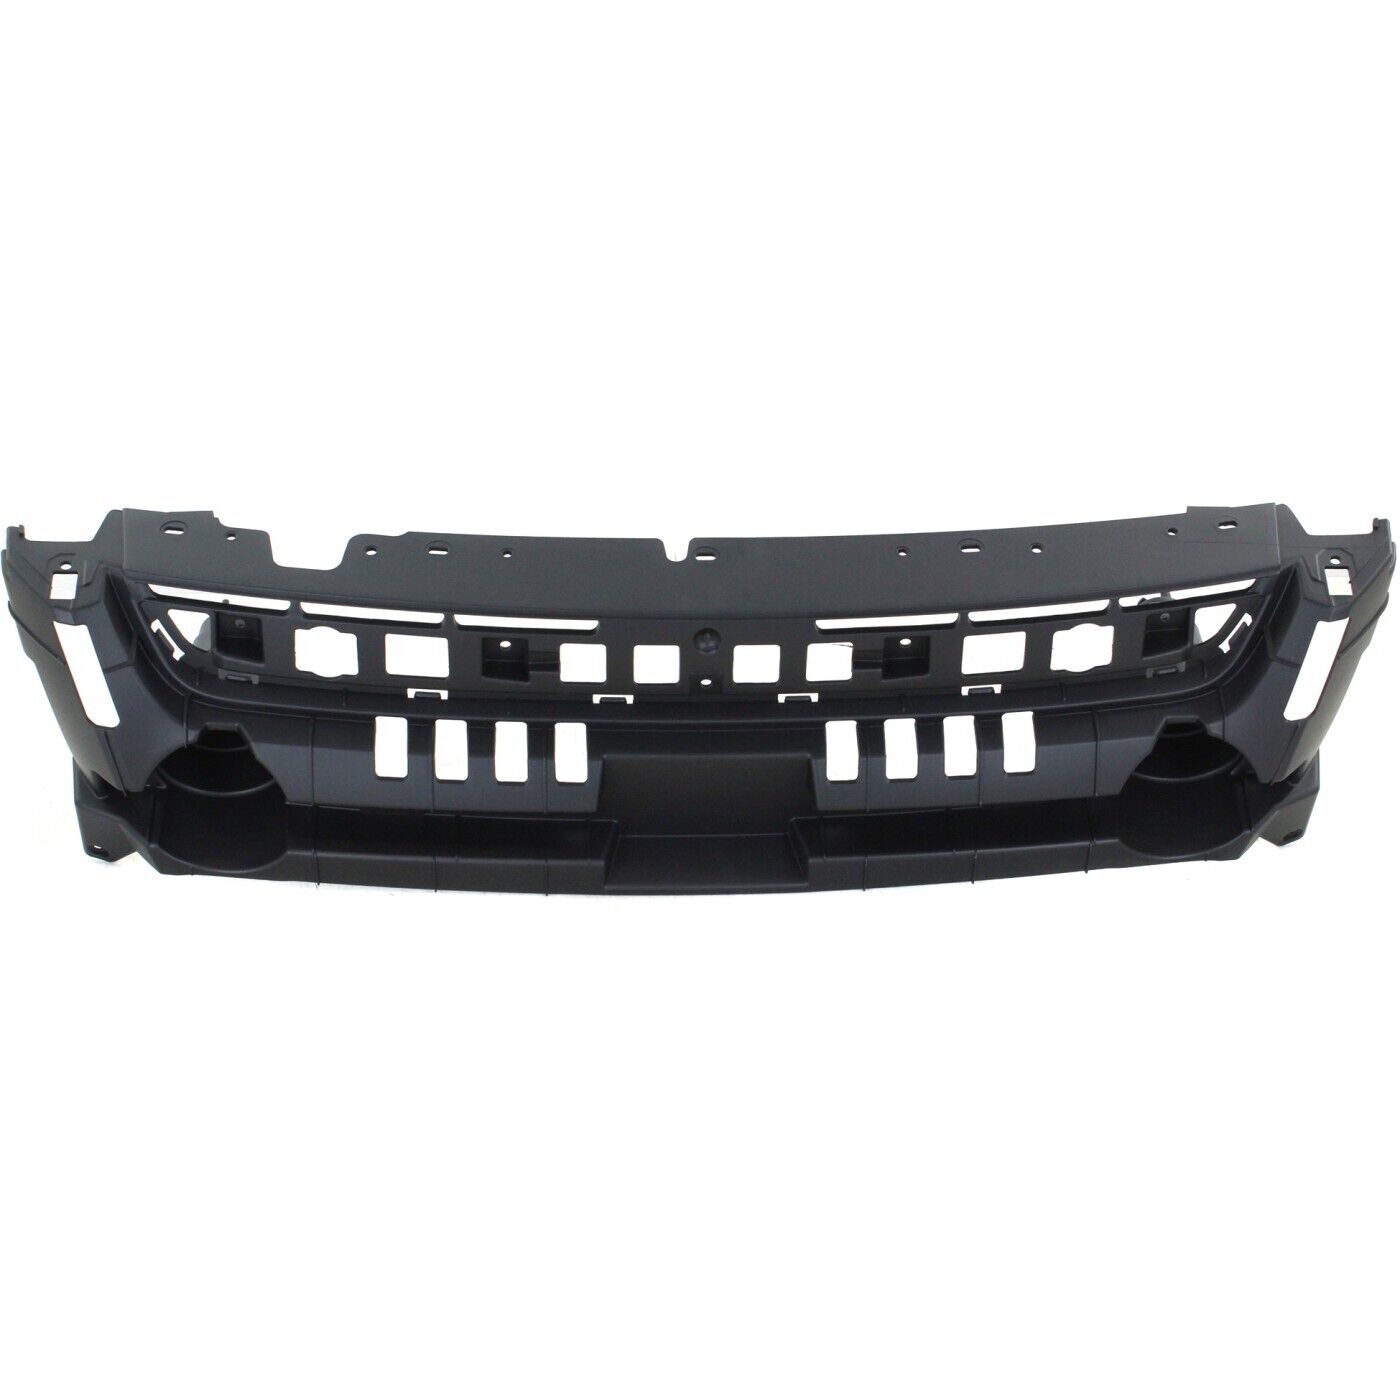 Header Panel For 2013-2016 Ford Escape Grille Mounting Panel Plastic Black